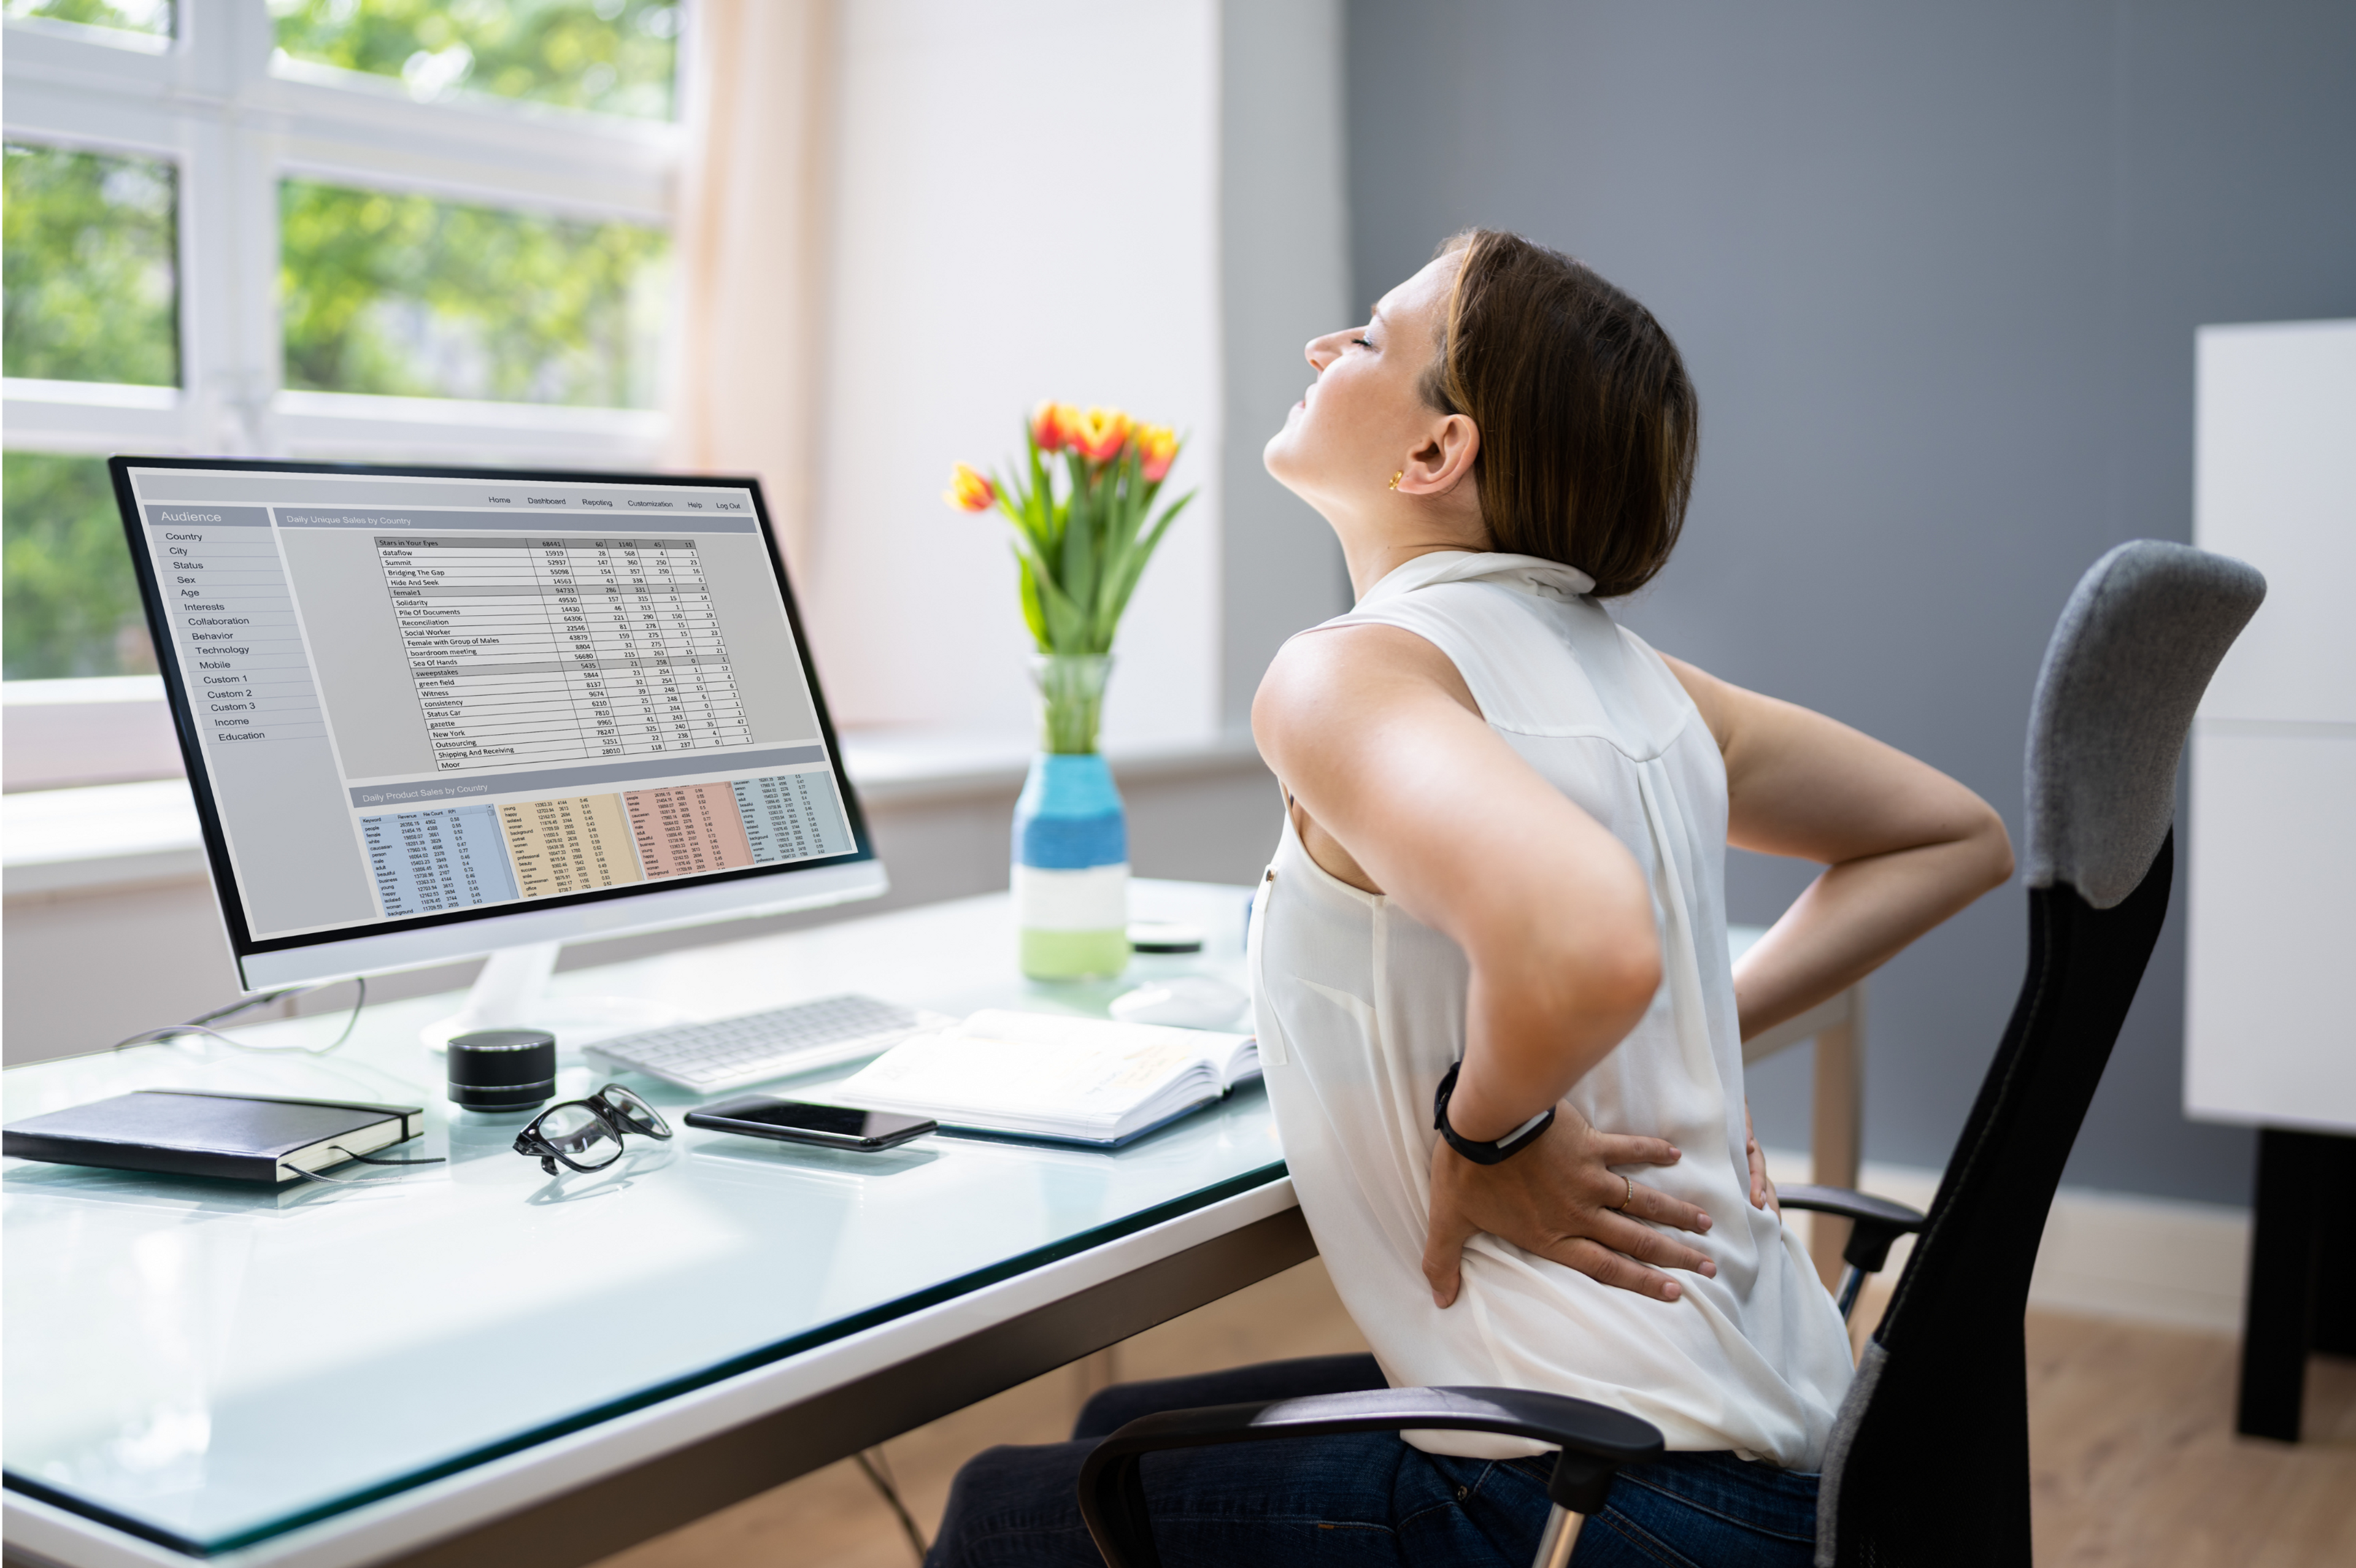 How to treat back pain you get from sitting.